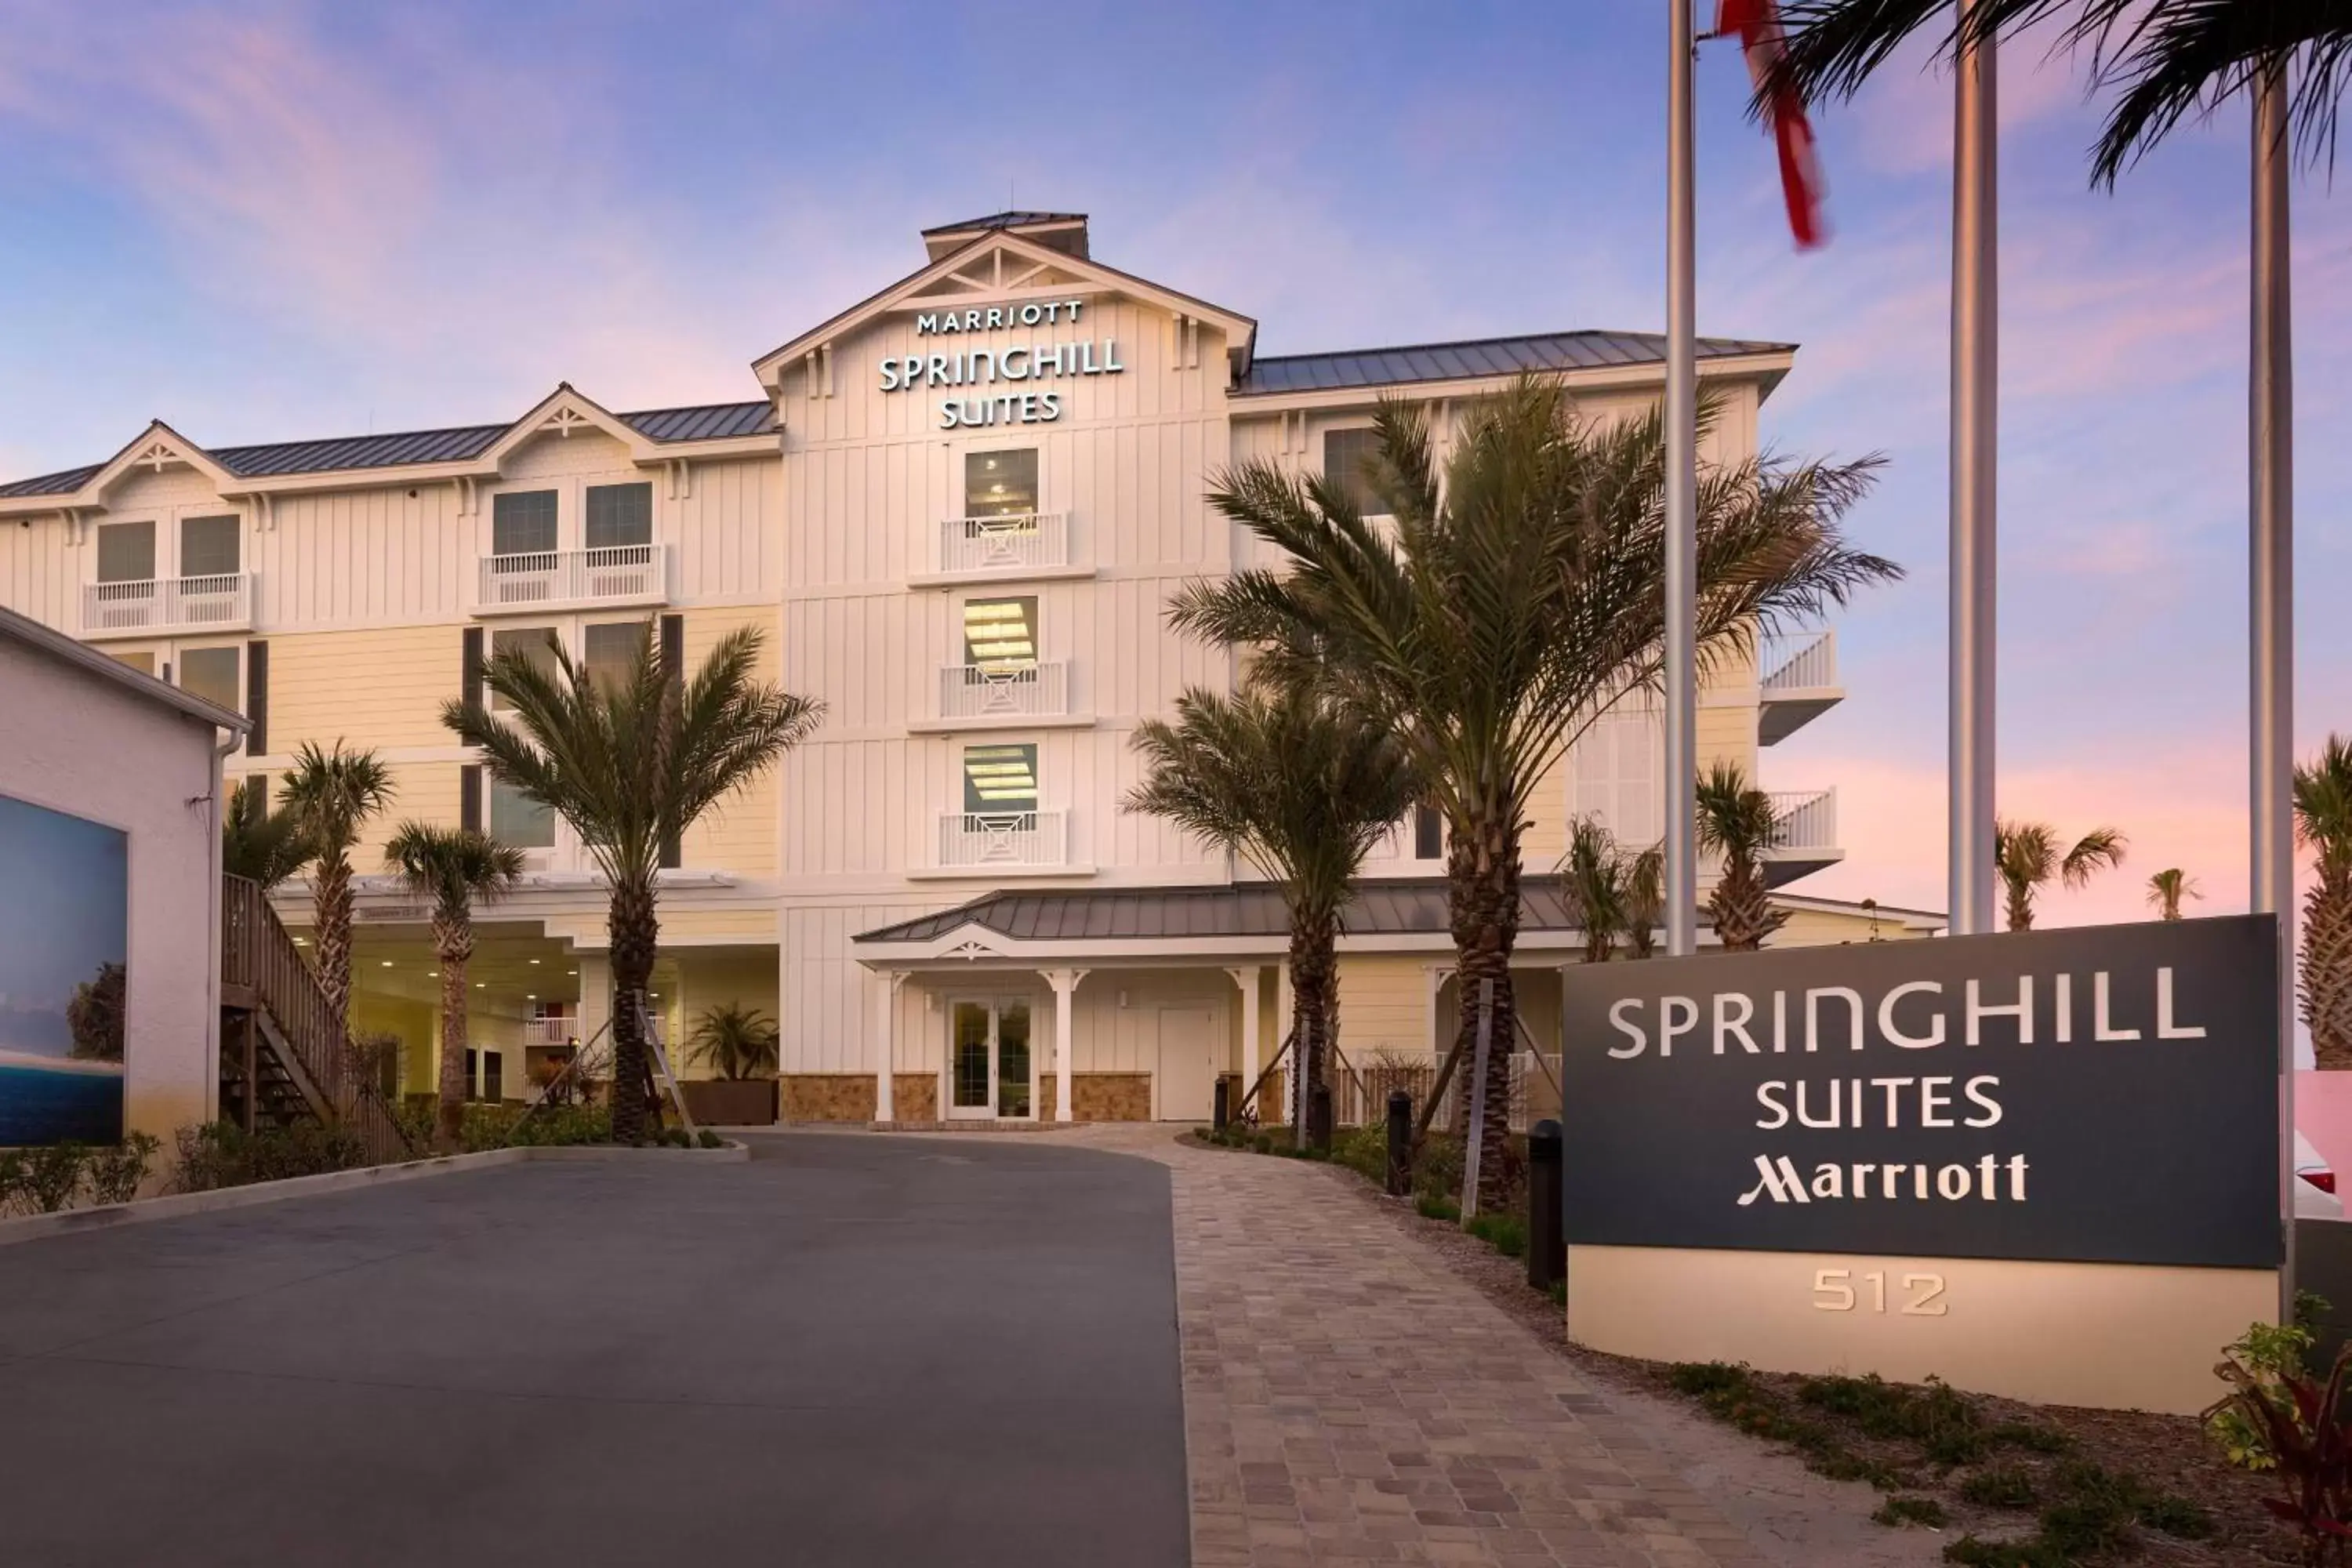 Property Building in SpringHill Suites by Marriott New Smyrna Beach